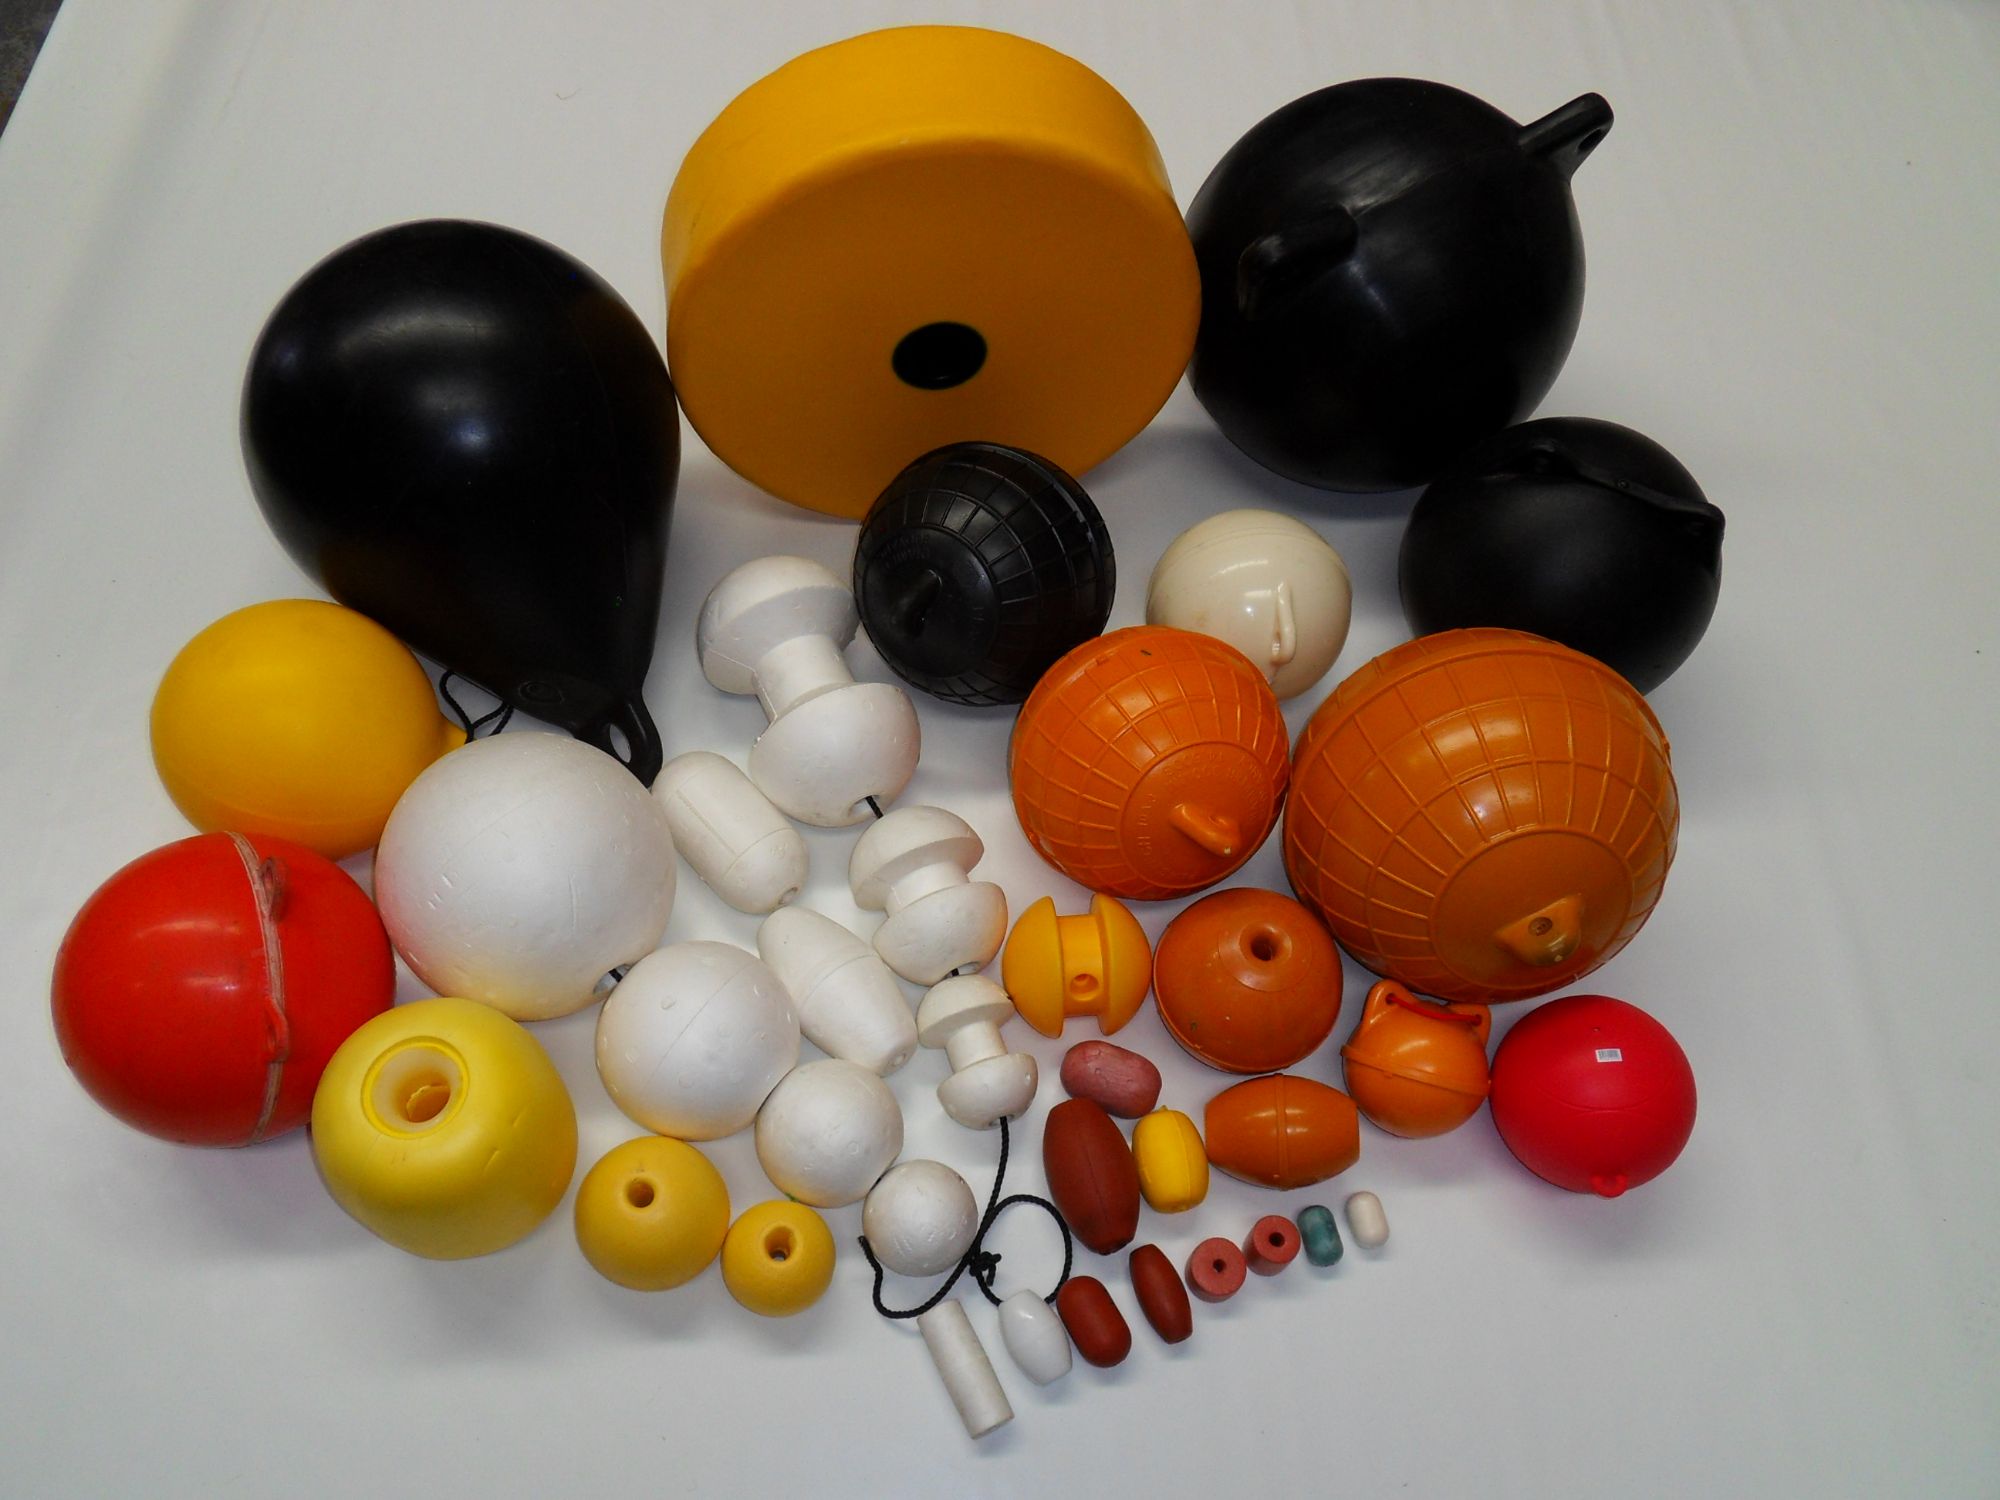 Fishing Floats and Buoys For Sale in Perth, Western Australia